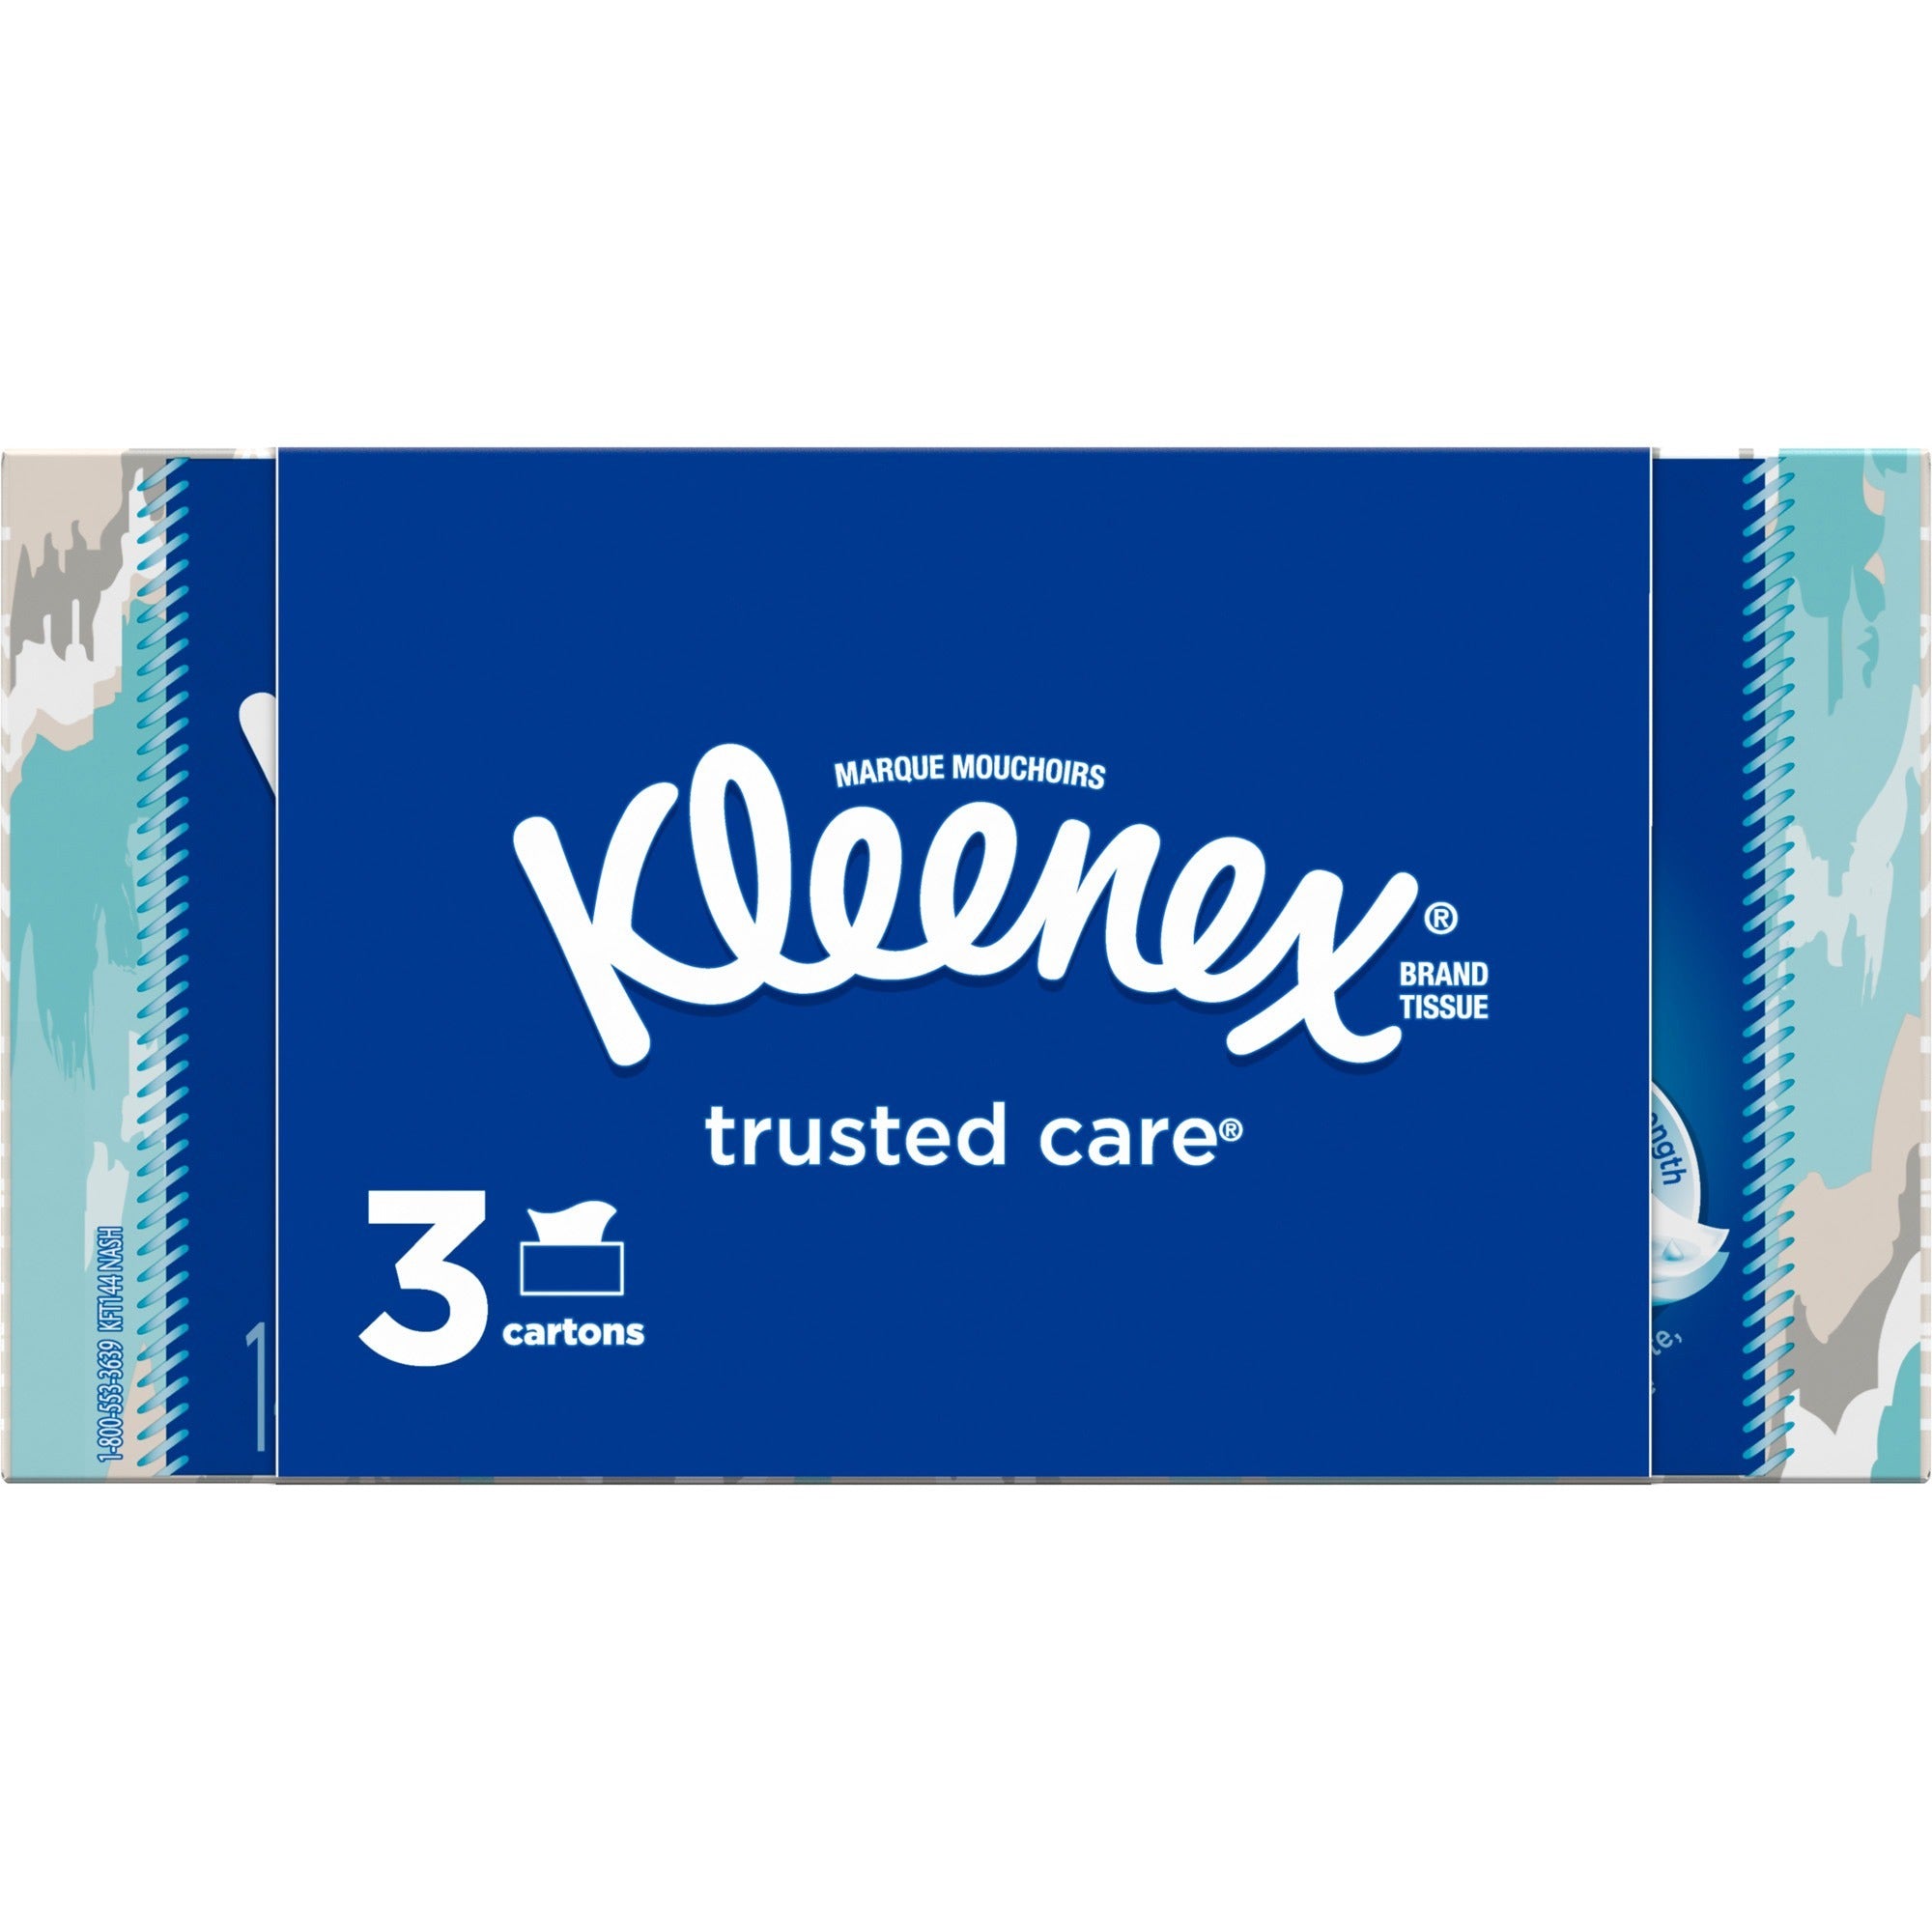 kleenex-trusted-care-facial-tissues-2-ply-820-x-840-white-strong-soft-absorbent-durable-for-home-office-school-144-per-box-12-carton_kcc50219ct - 2